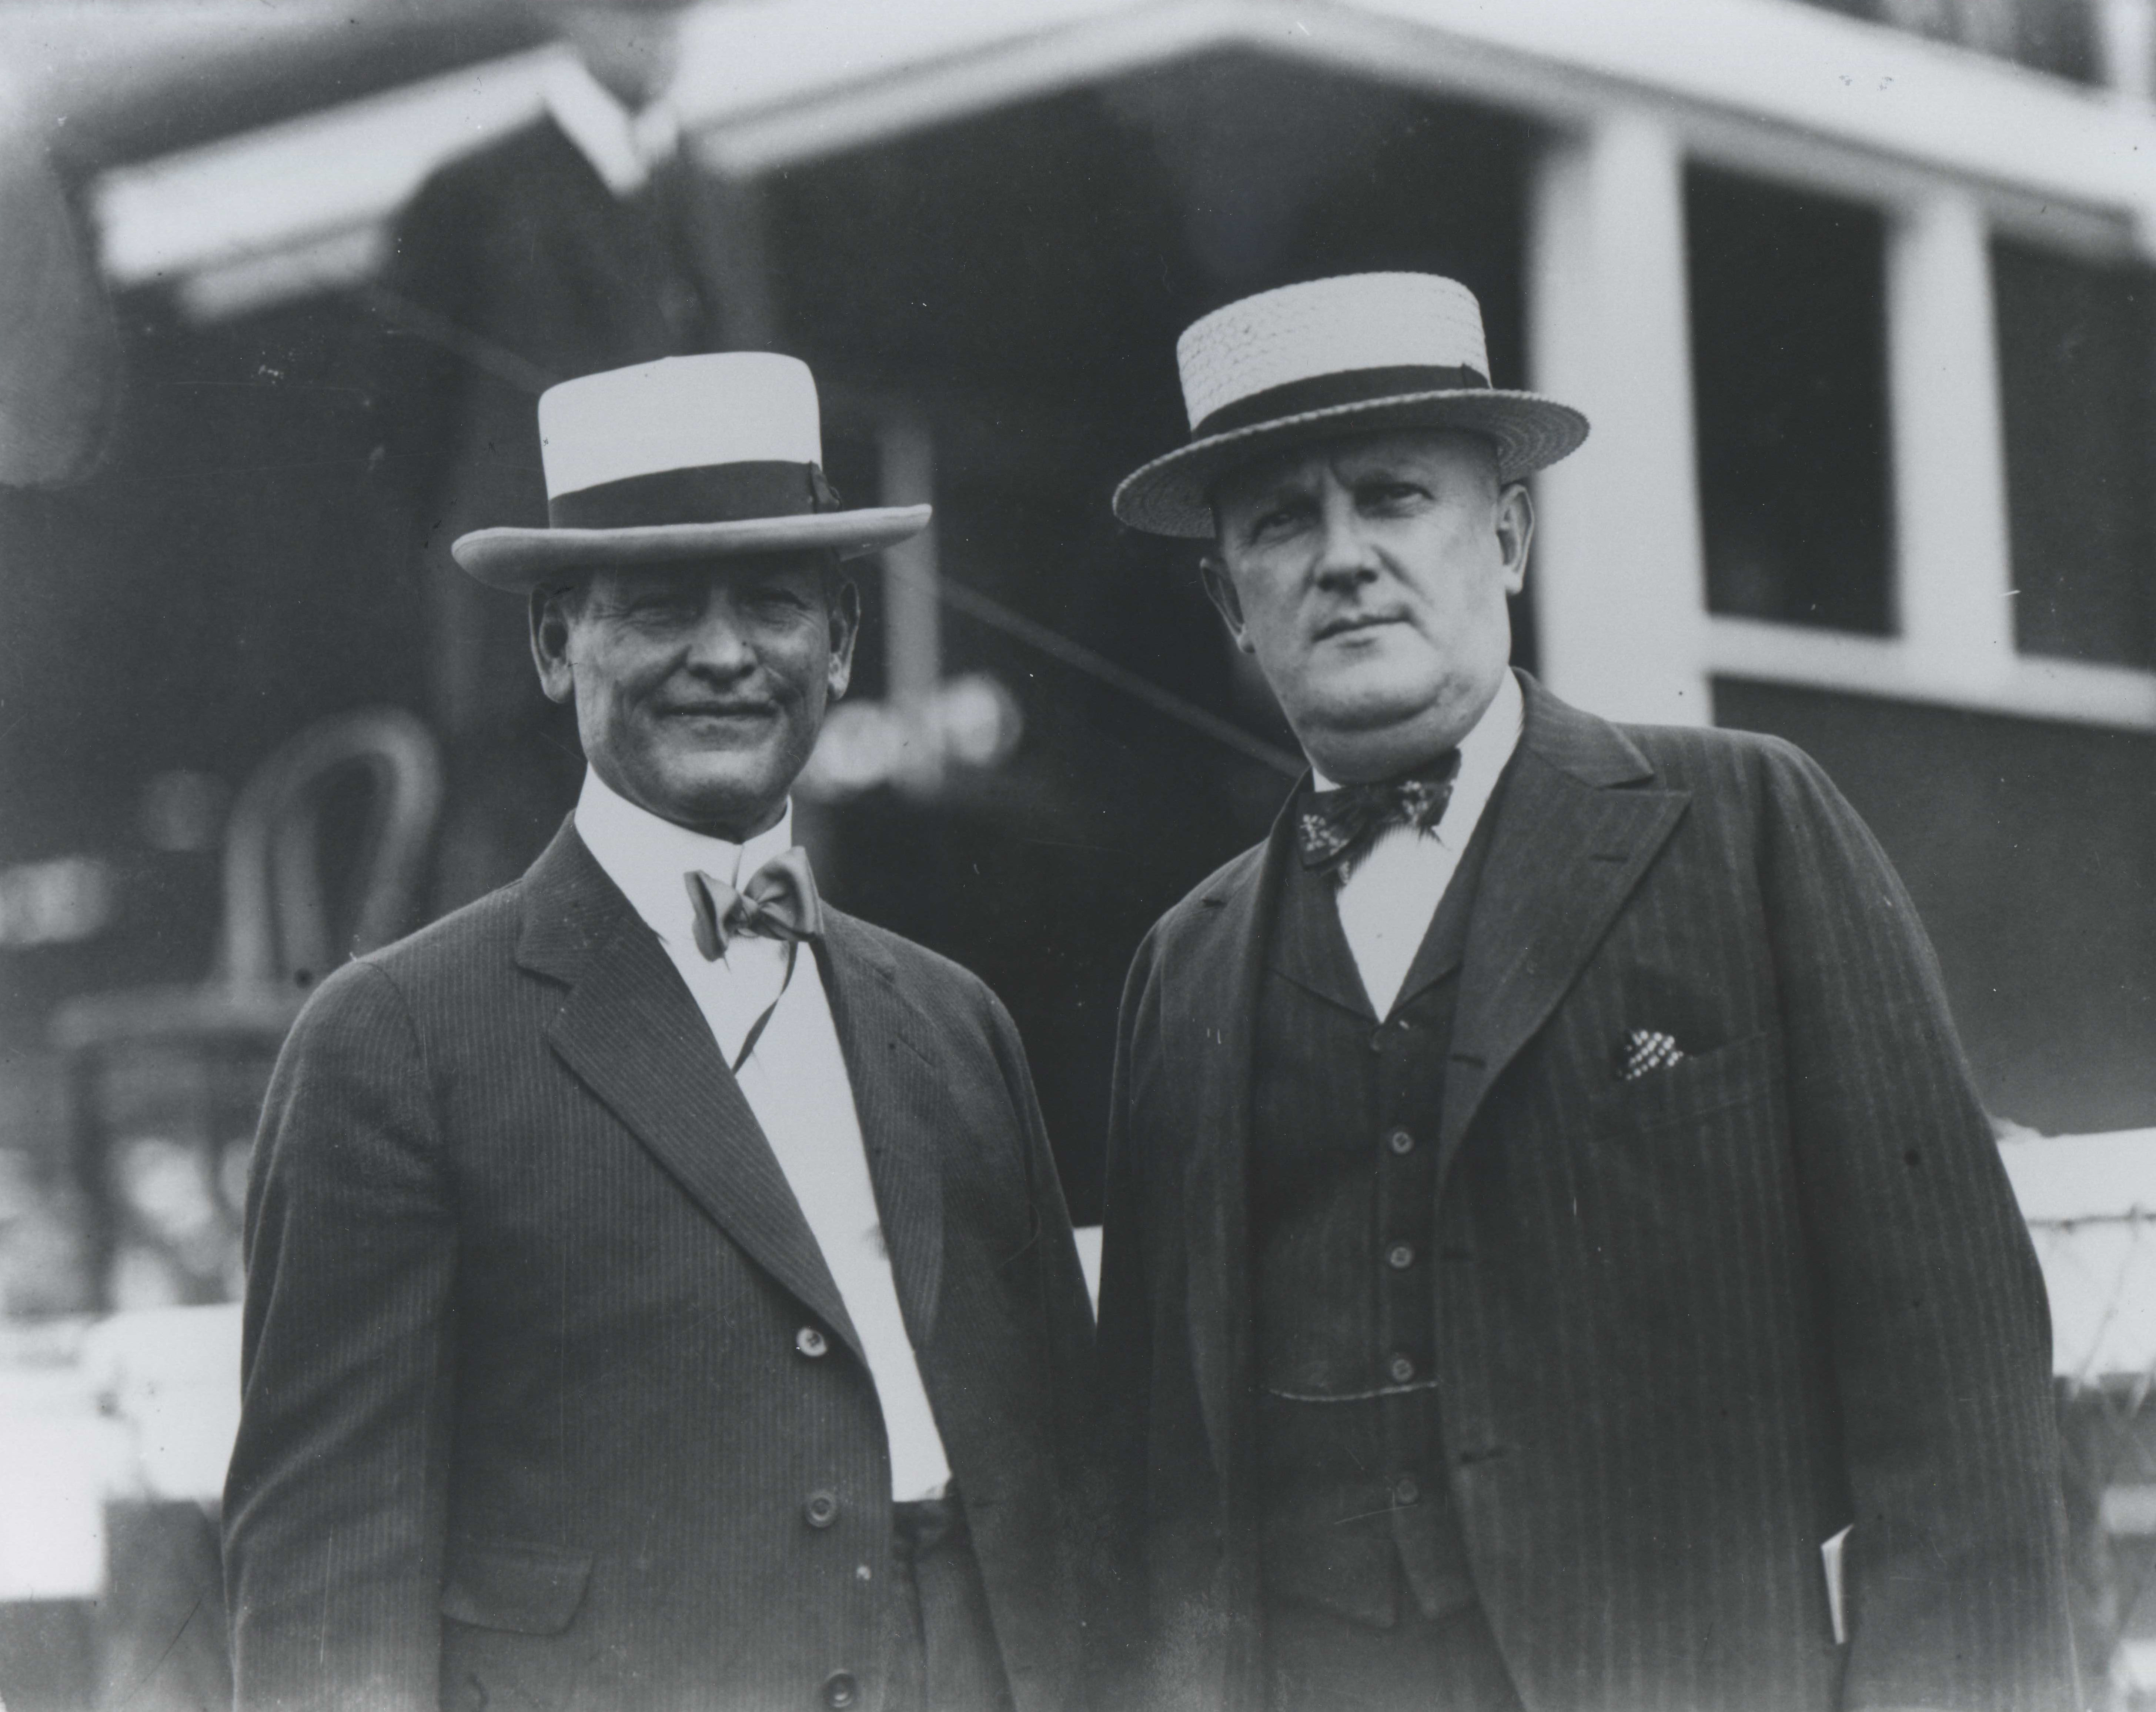 James G. Rowe, Sr. (on left) and an unidentified man (Keeneland Library Cook Collection/Museum Collection)